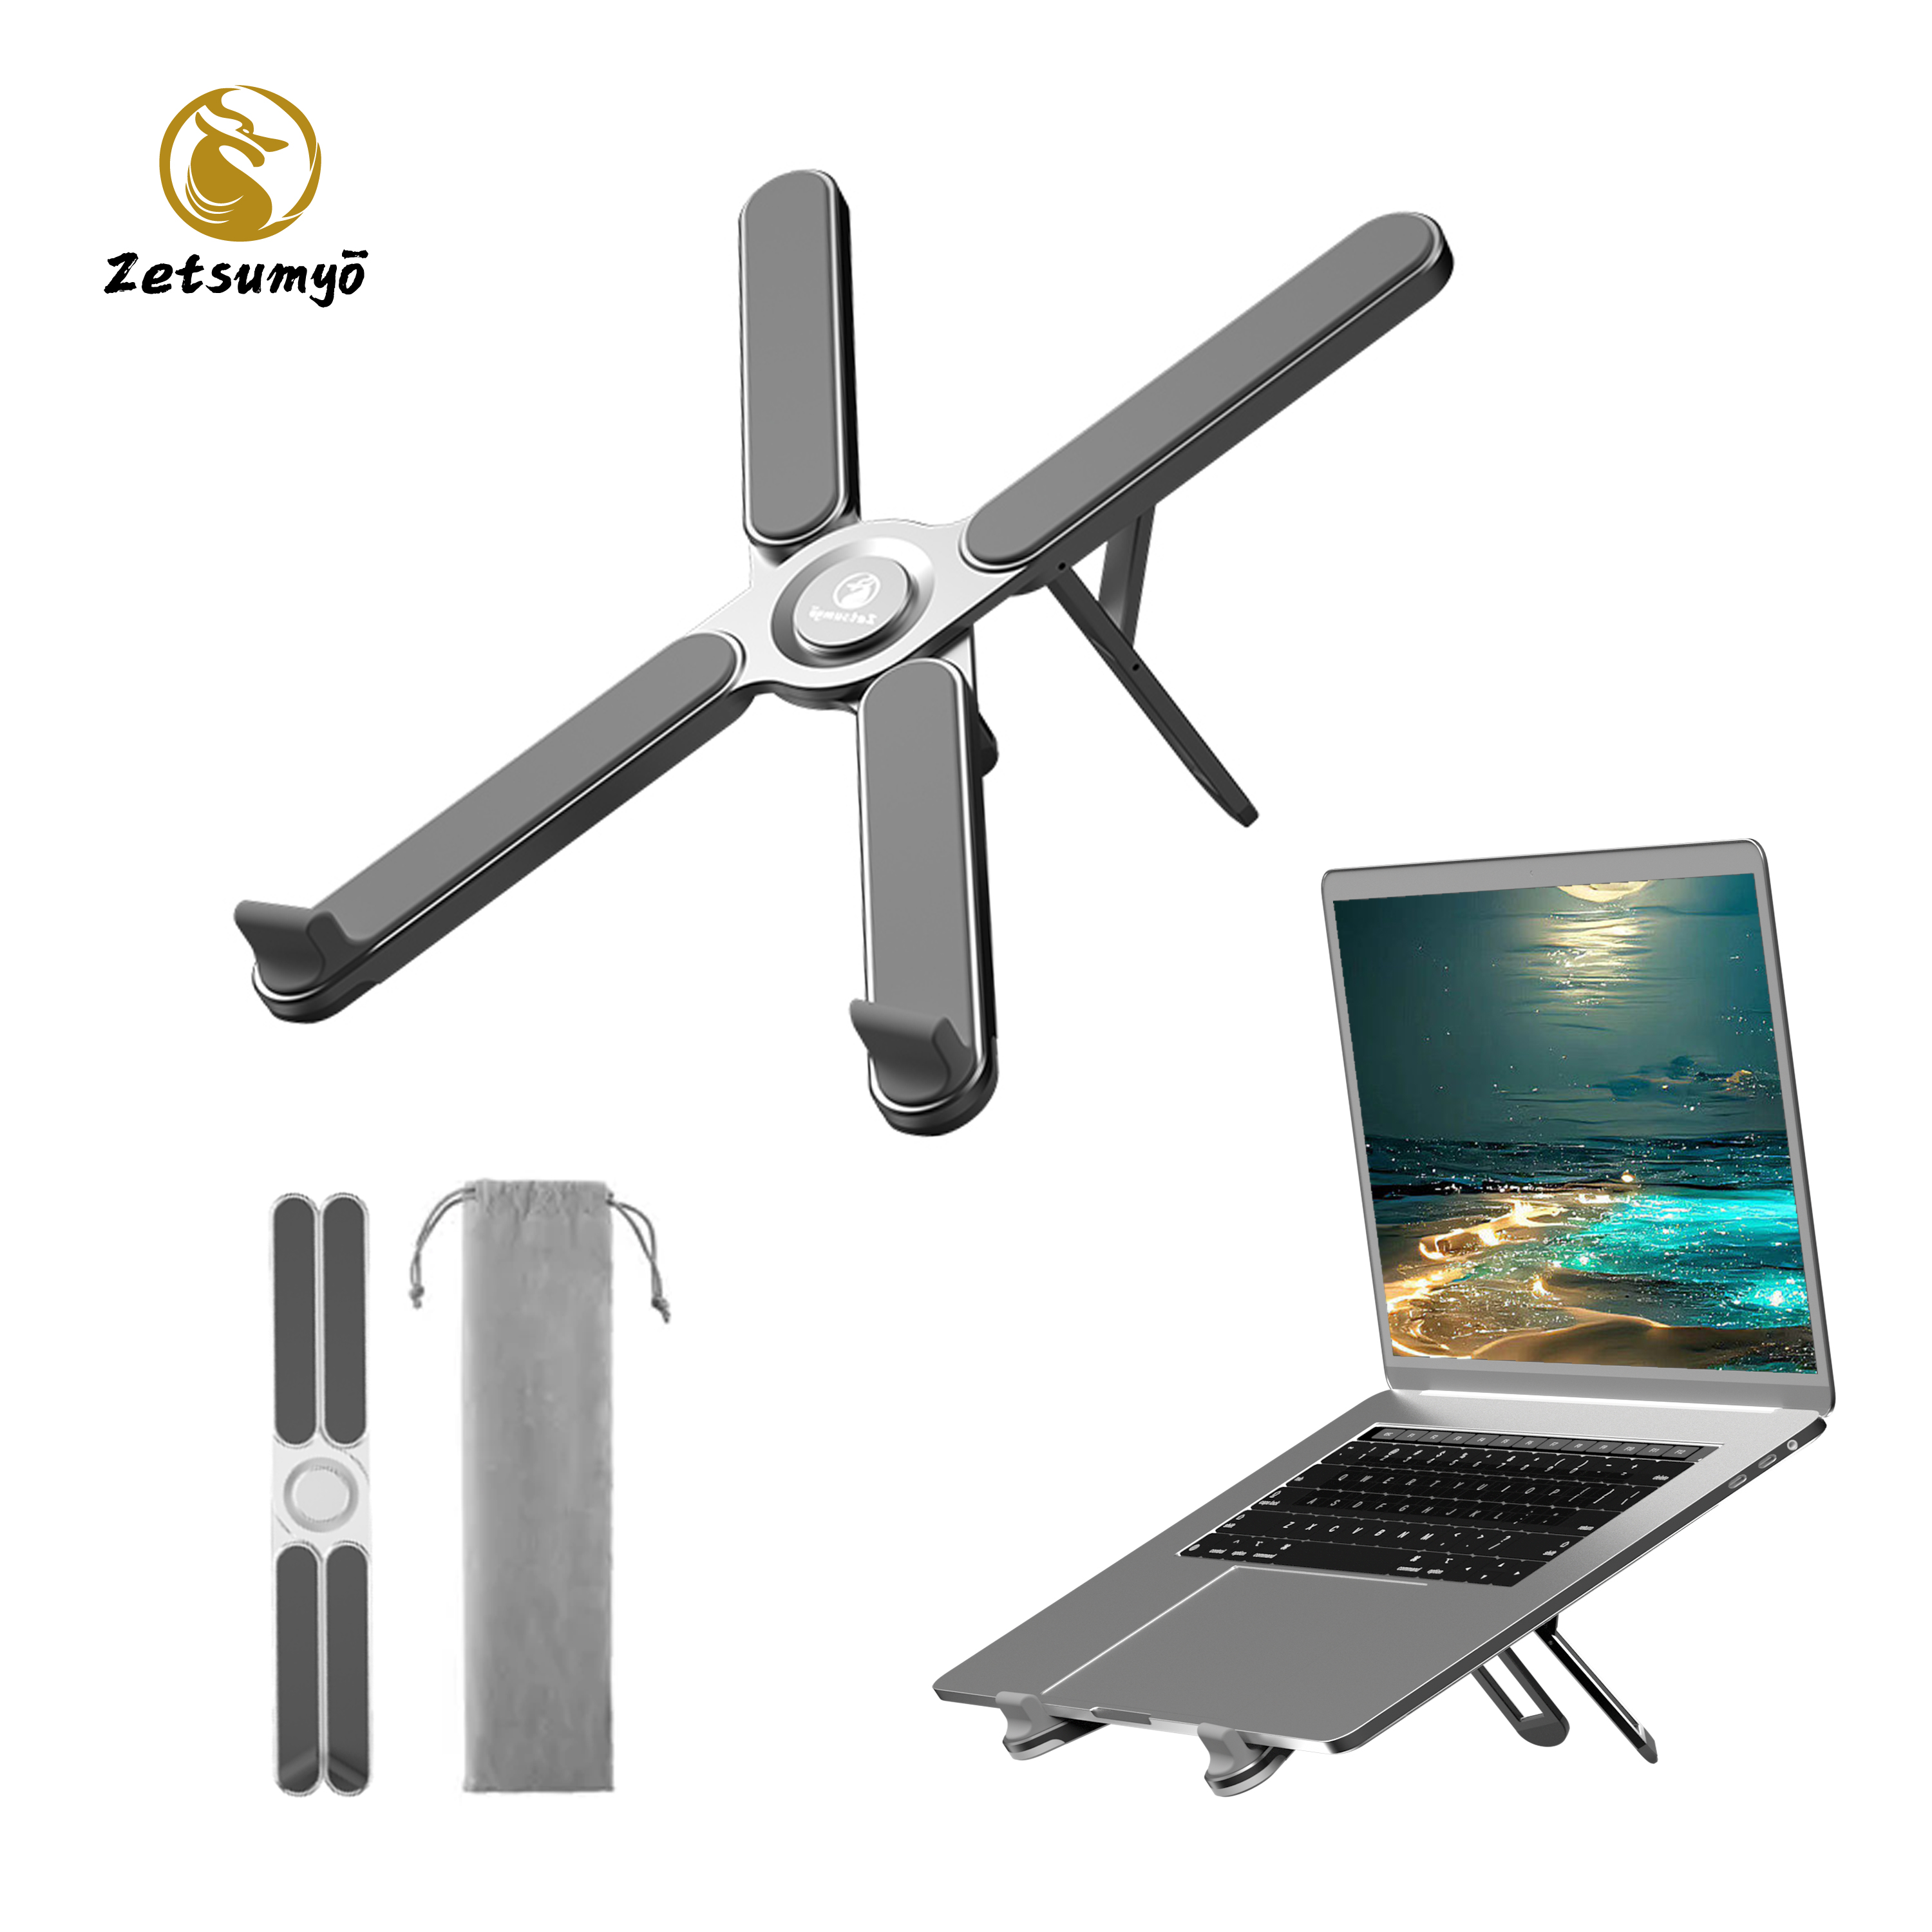 Patent Design Folding Holder Aluminum Alloy Laptop Stand Suitable For Bedrooms And Offices